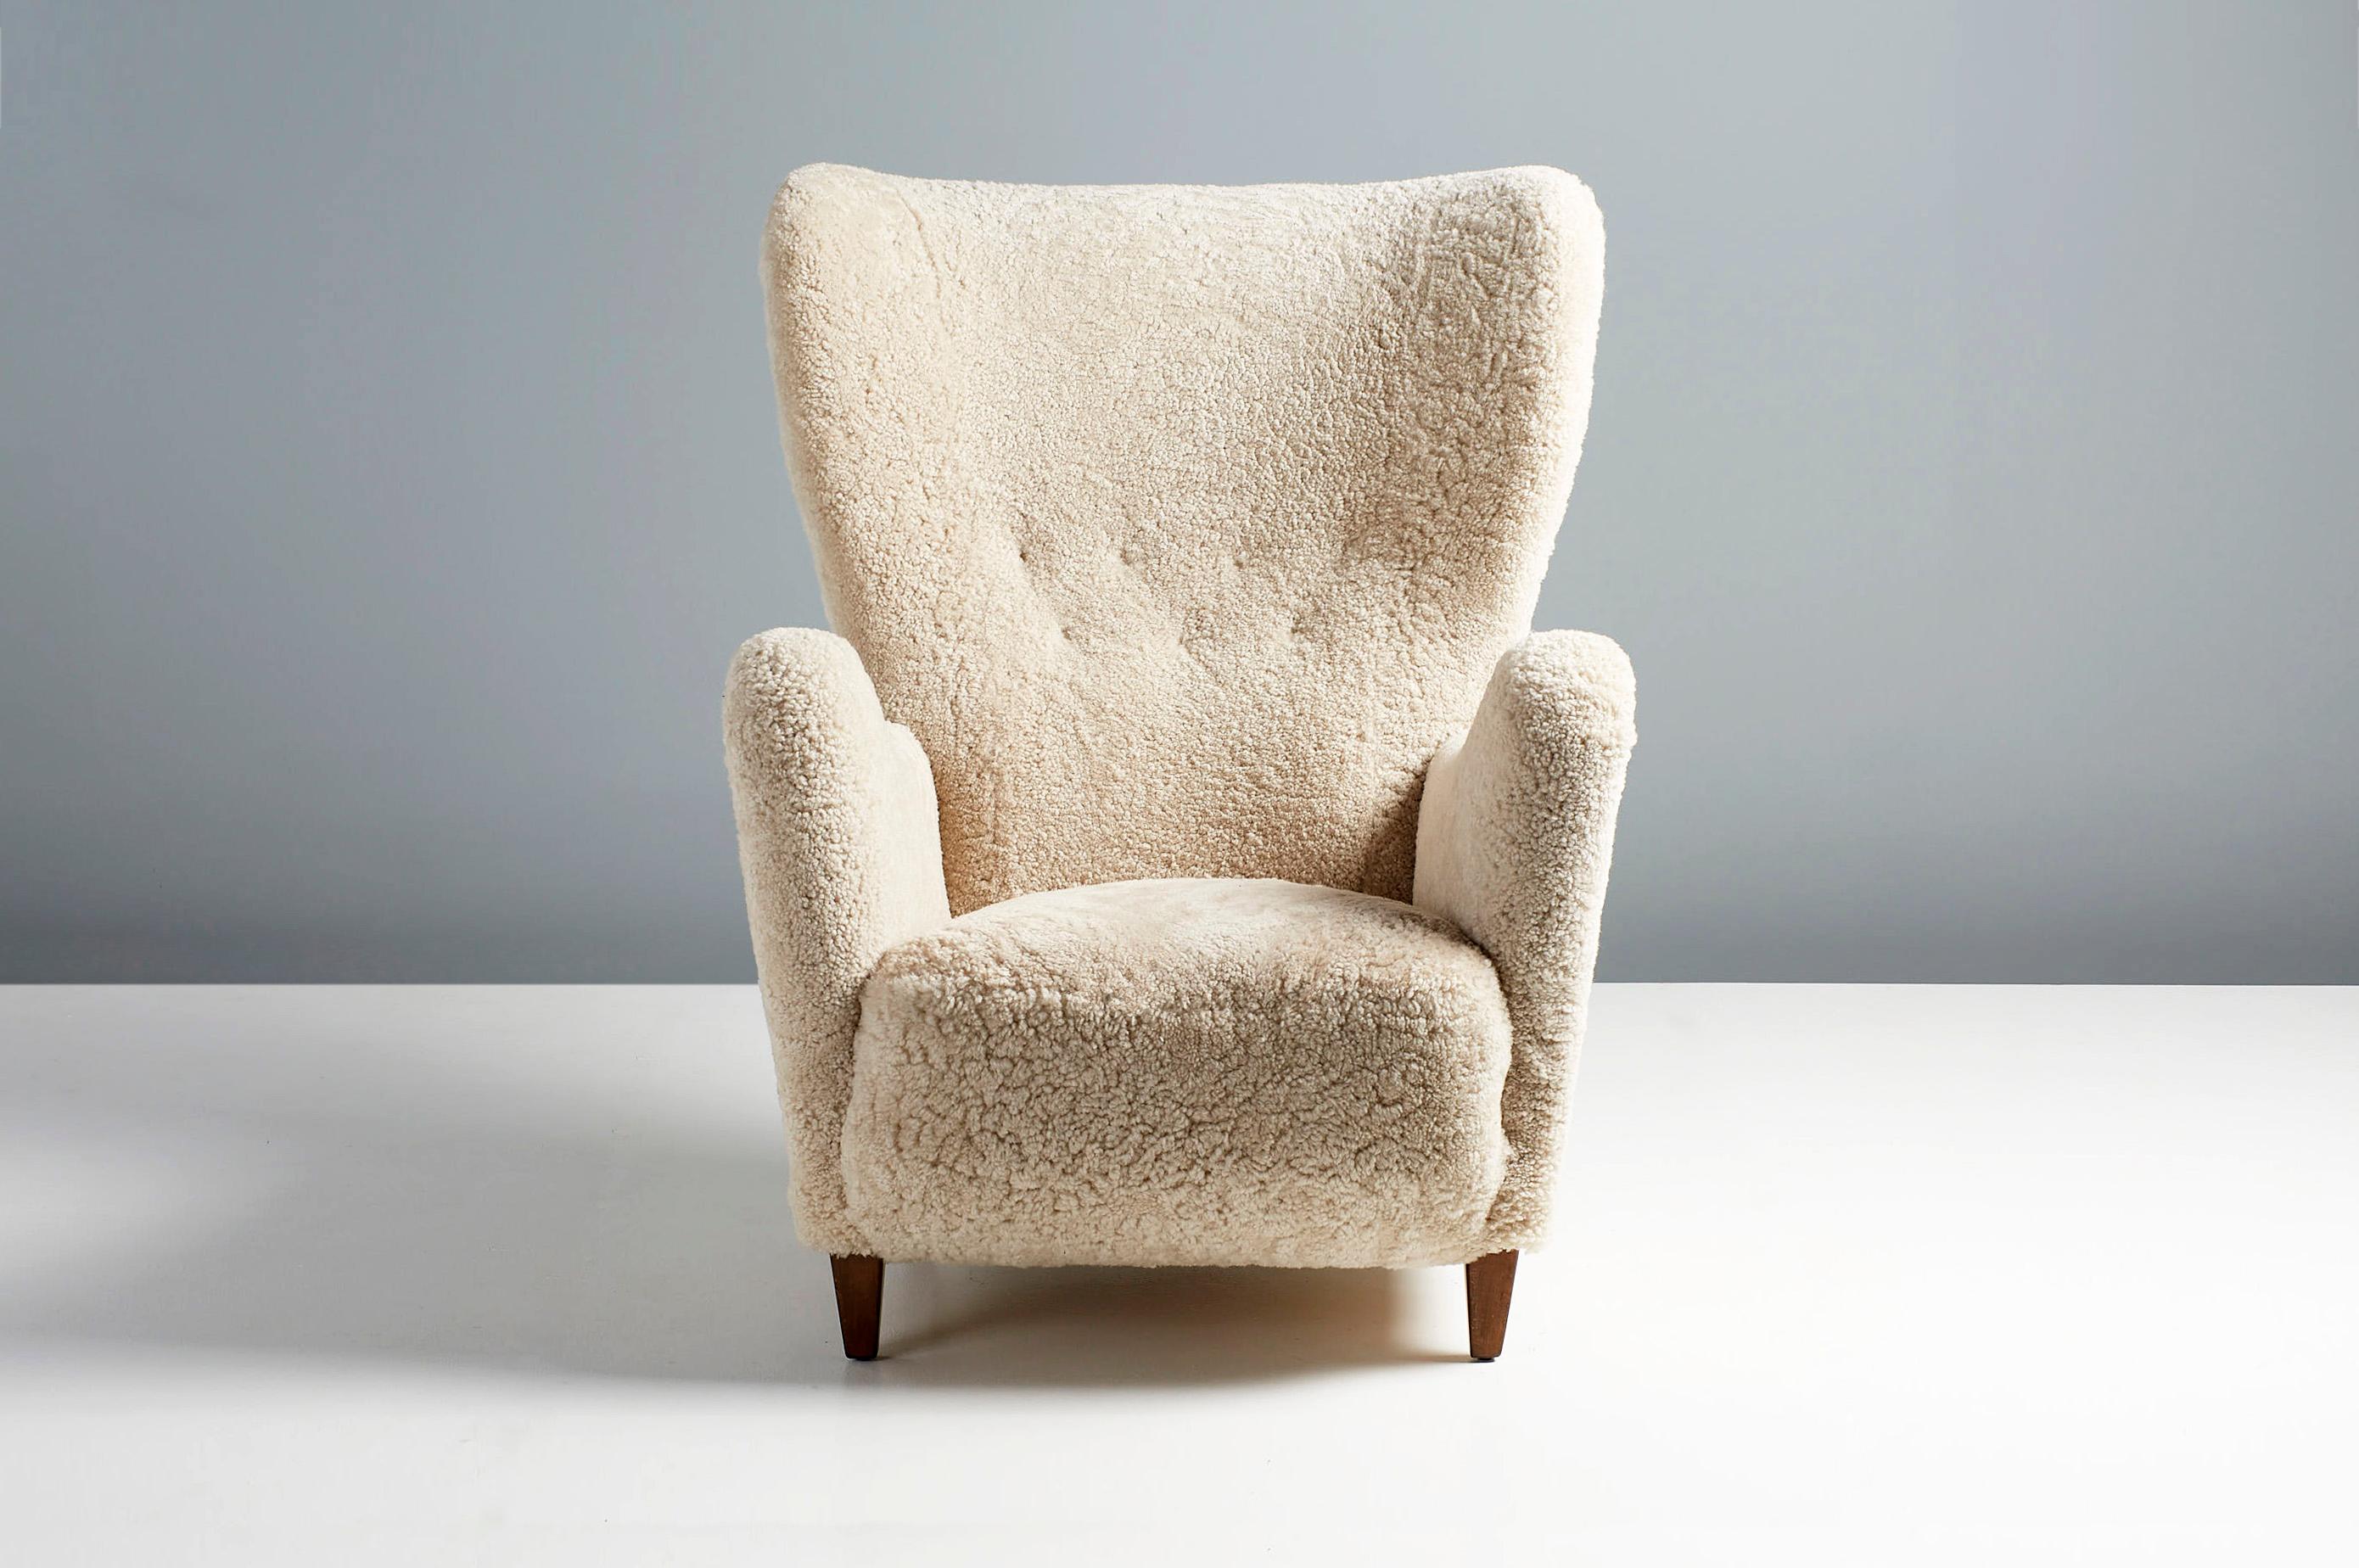 Otto Schulz Wing chair, c1940s

An imposing and impressive wing chair from Swedish master designer Otto Schulz, produced by hiss own company Boet in Gothenburg Sweden in the 1940s. The organic sweeping arms and wings mark this rare piece out from